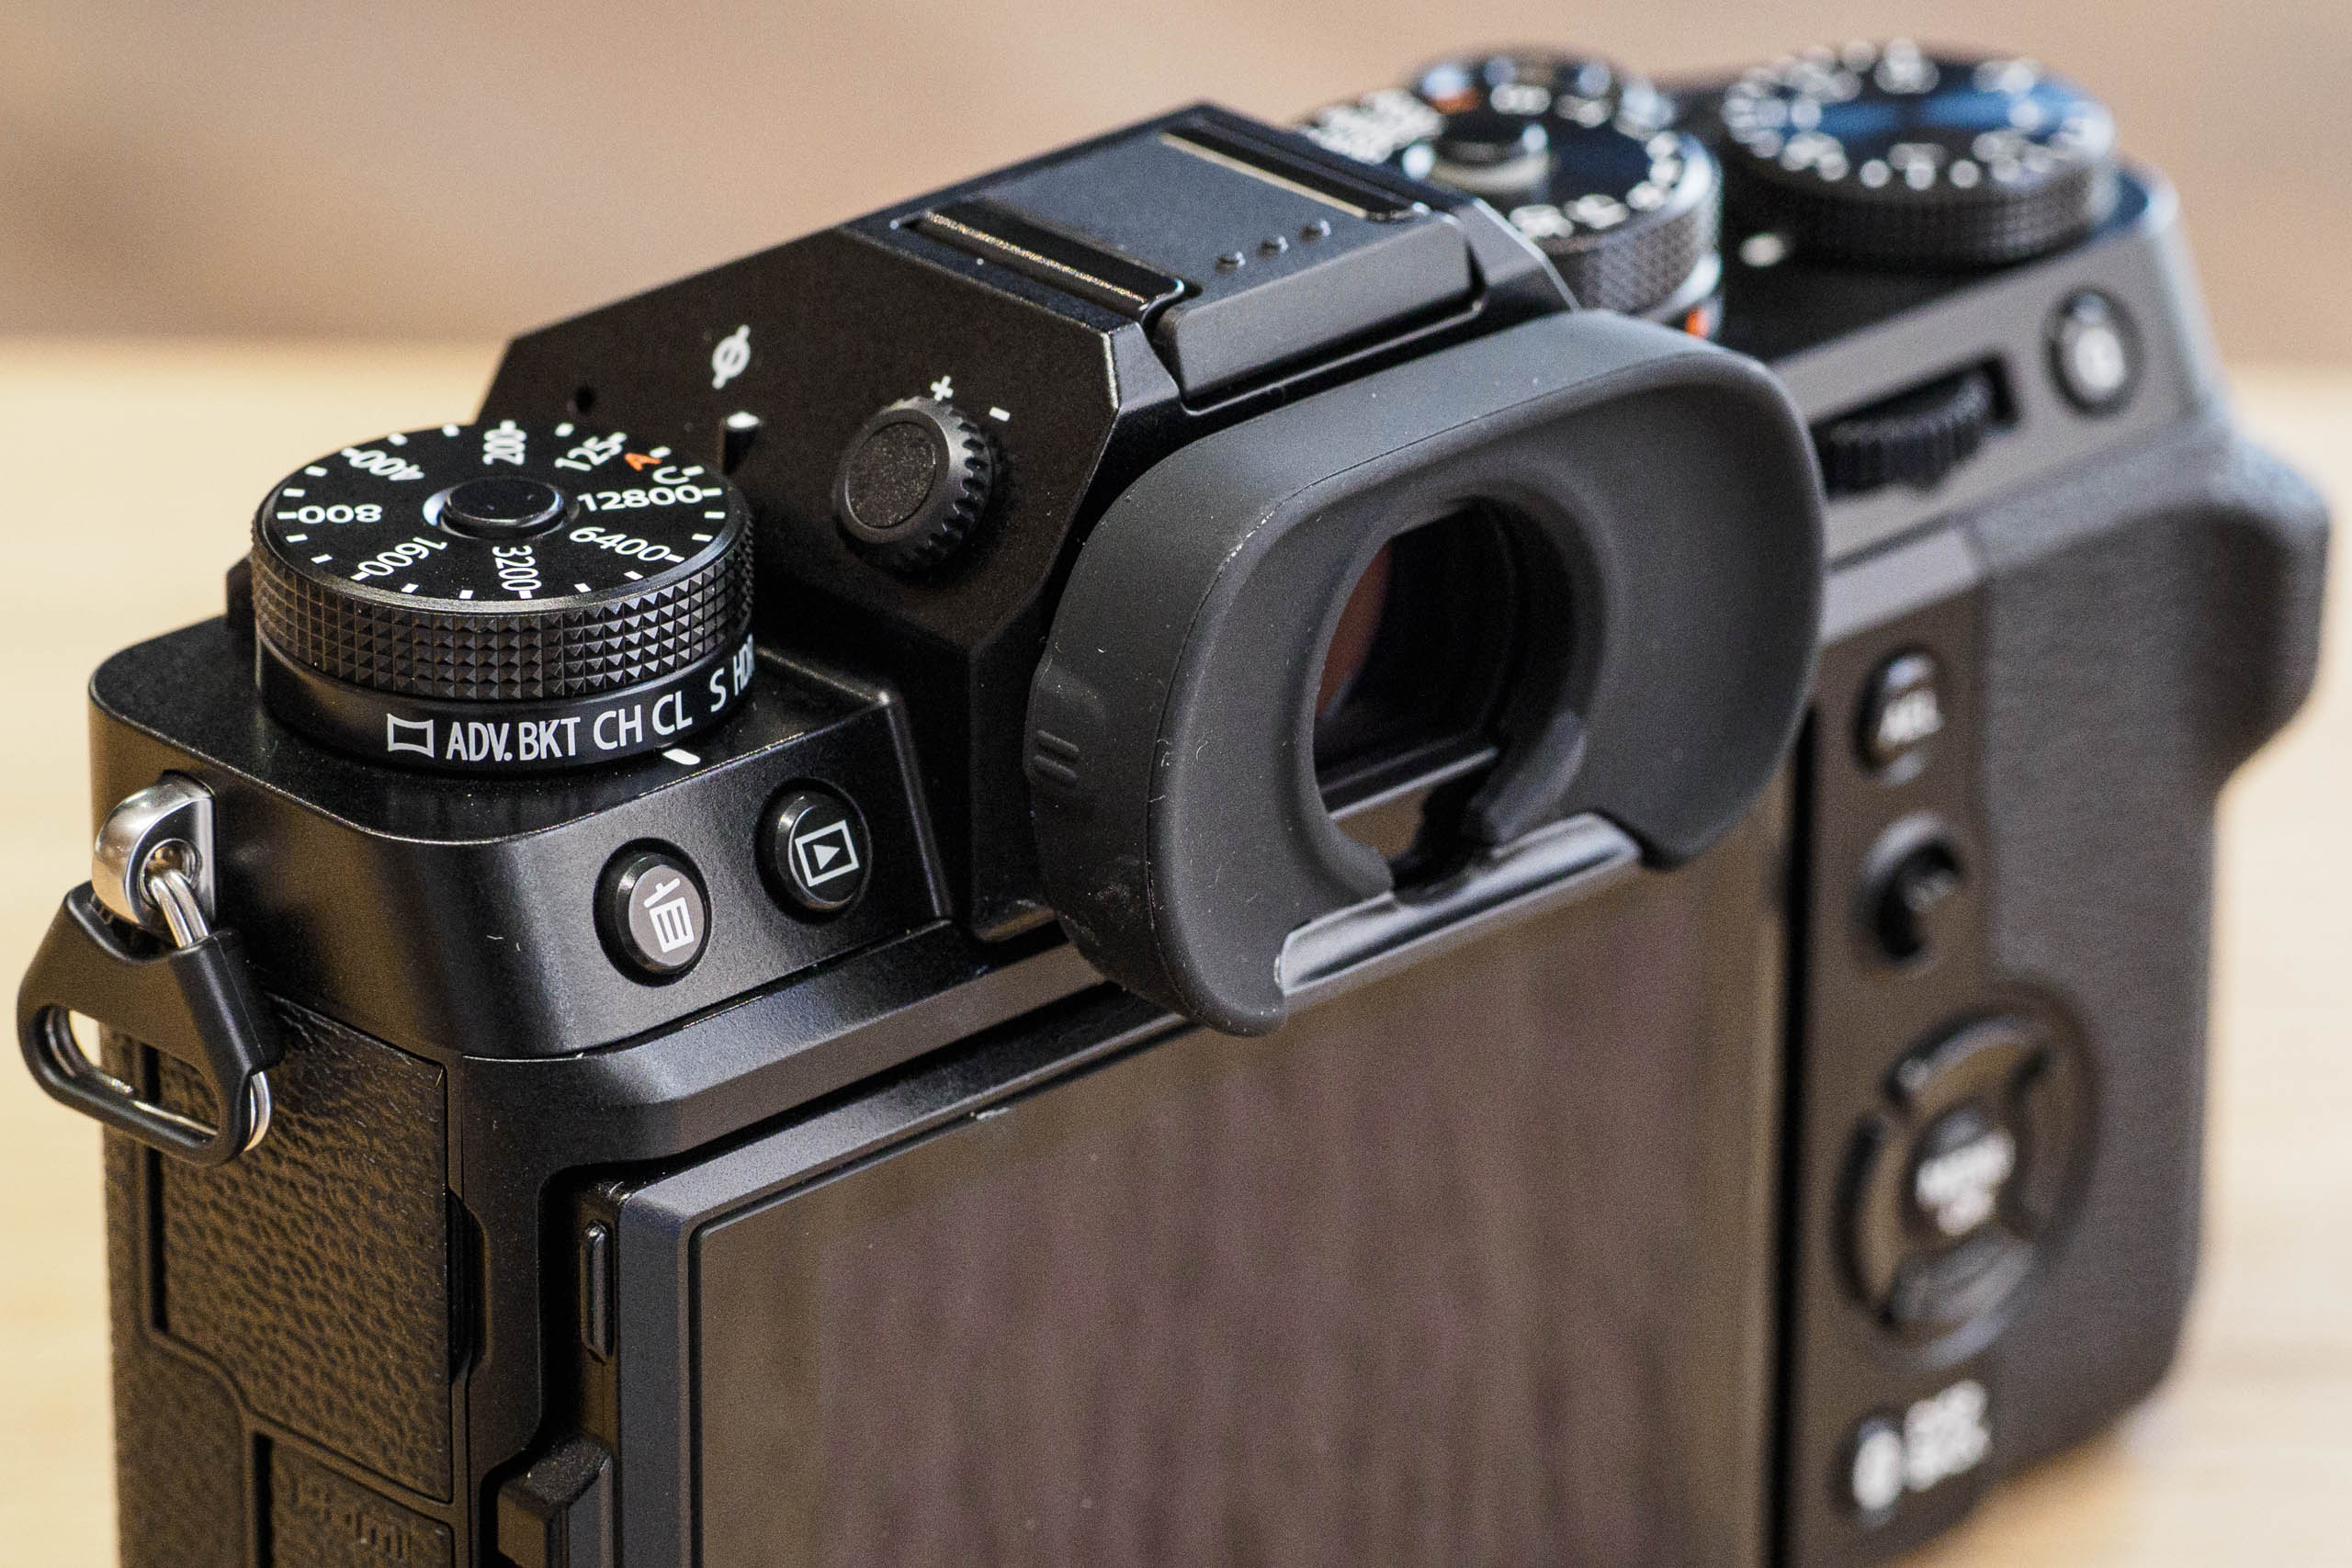 Fujifilm X-T5 drive mode switch, top plate controls and viewfinder